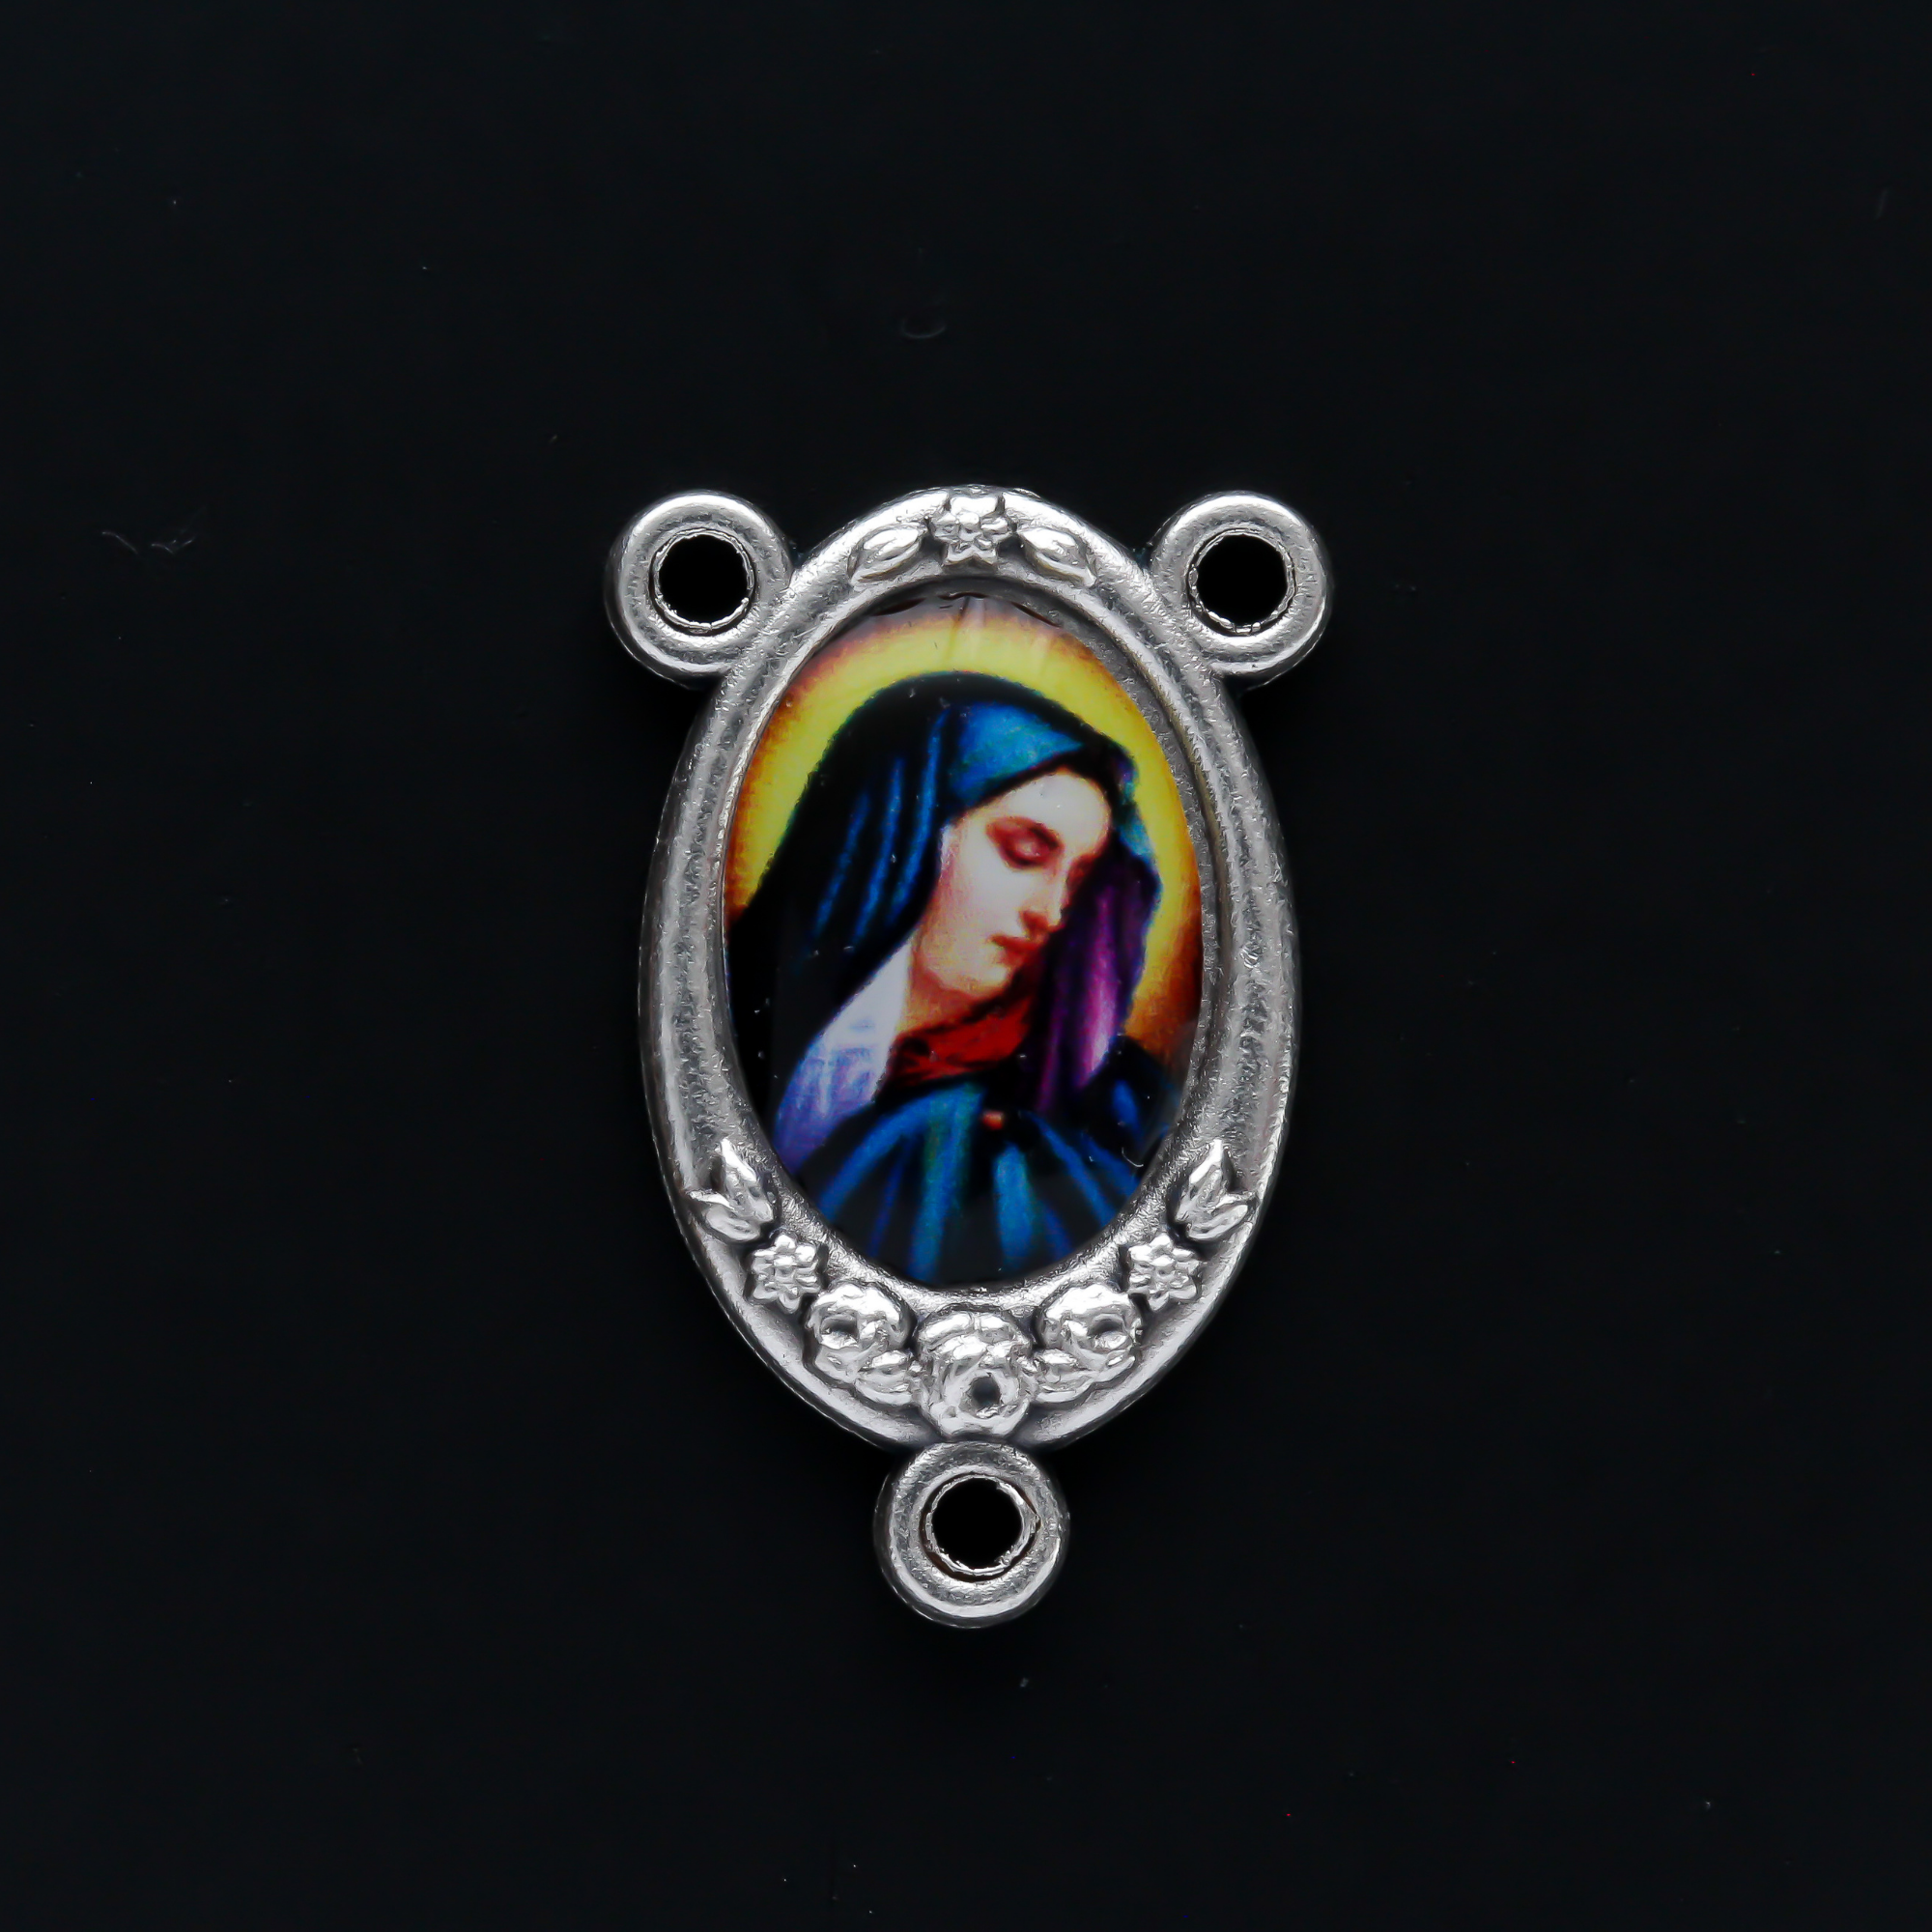 Our Lady of Sorrows Rosary Centerpiece with Color Image inlaid in Silver Oxidized Center Made in Italy